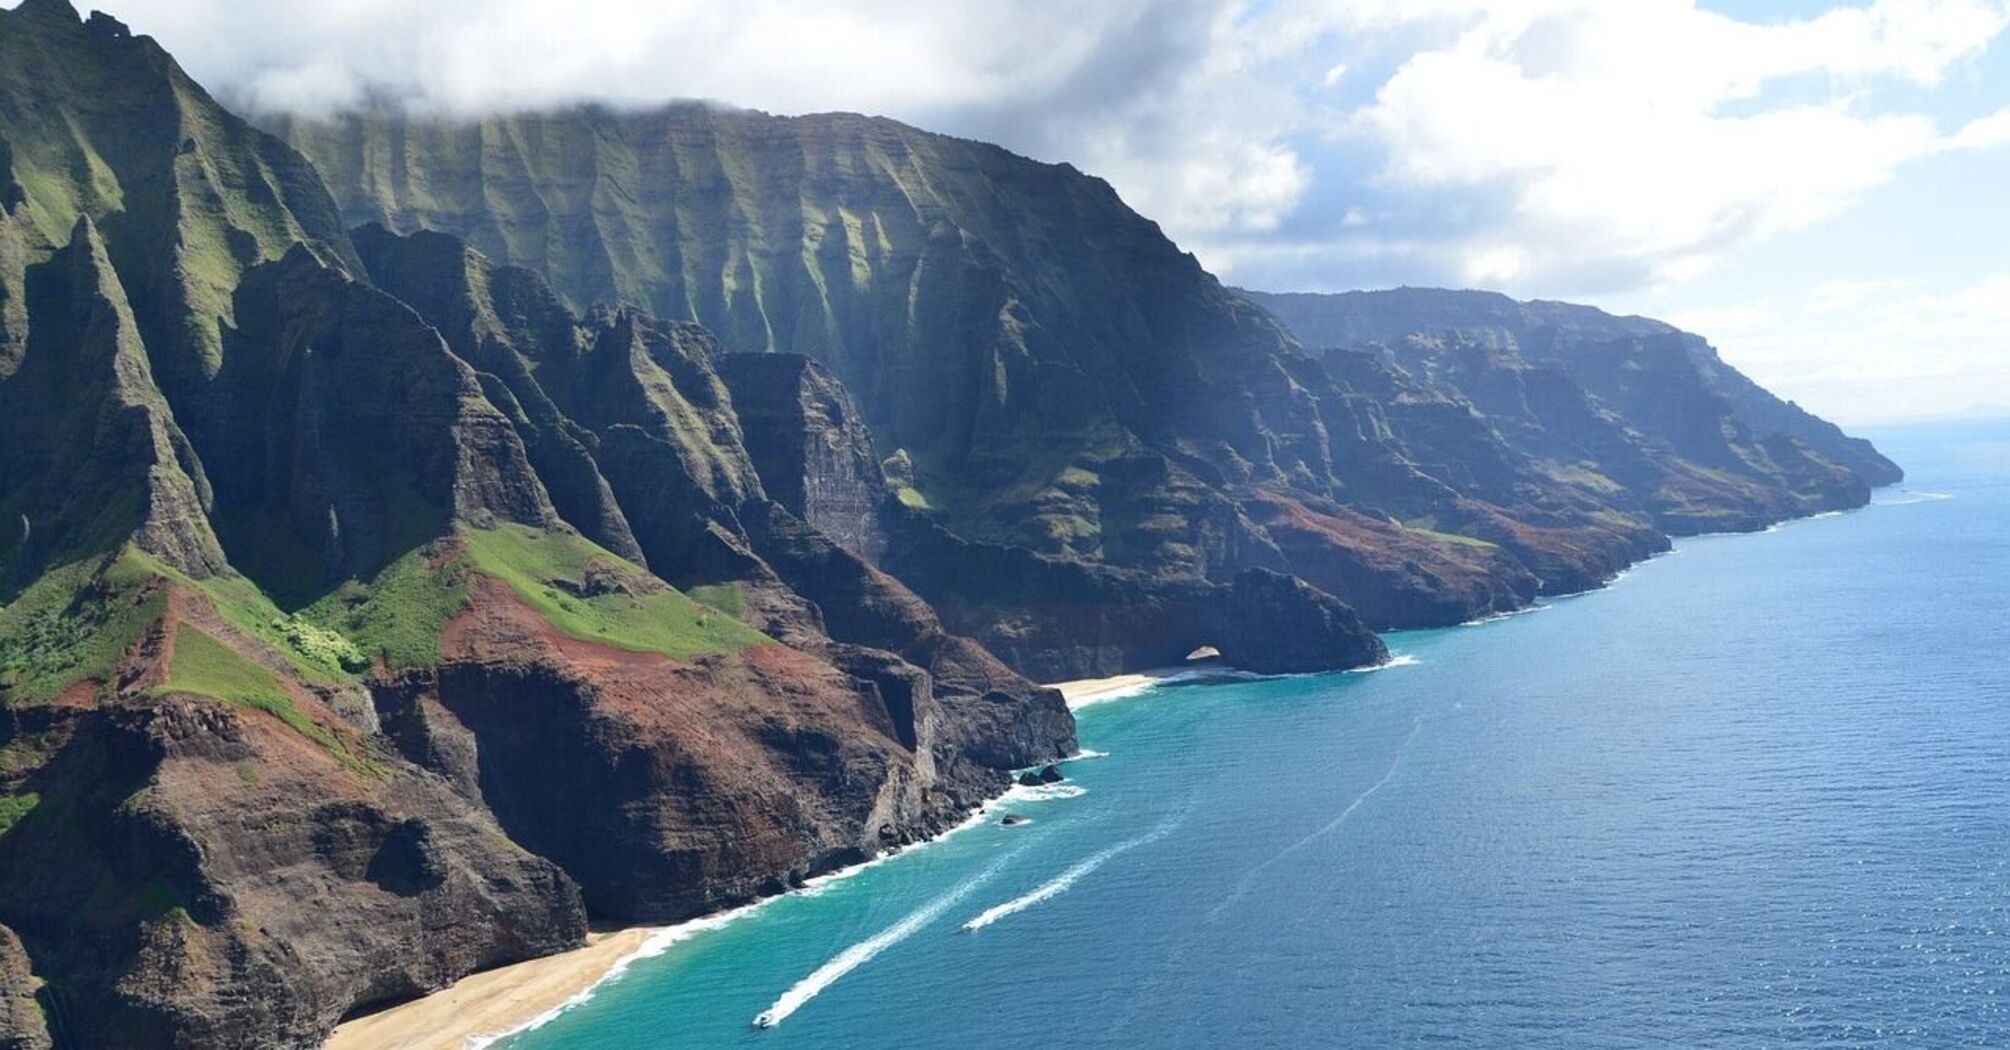 How to get a permit for the Kalalau Trail: one of the most beautiful hikes in Hawaii